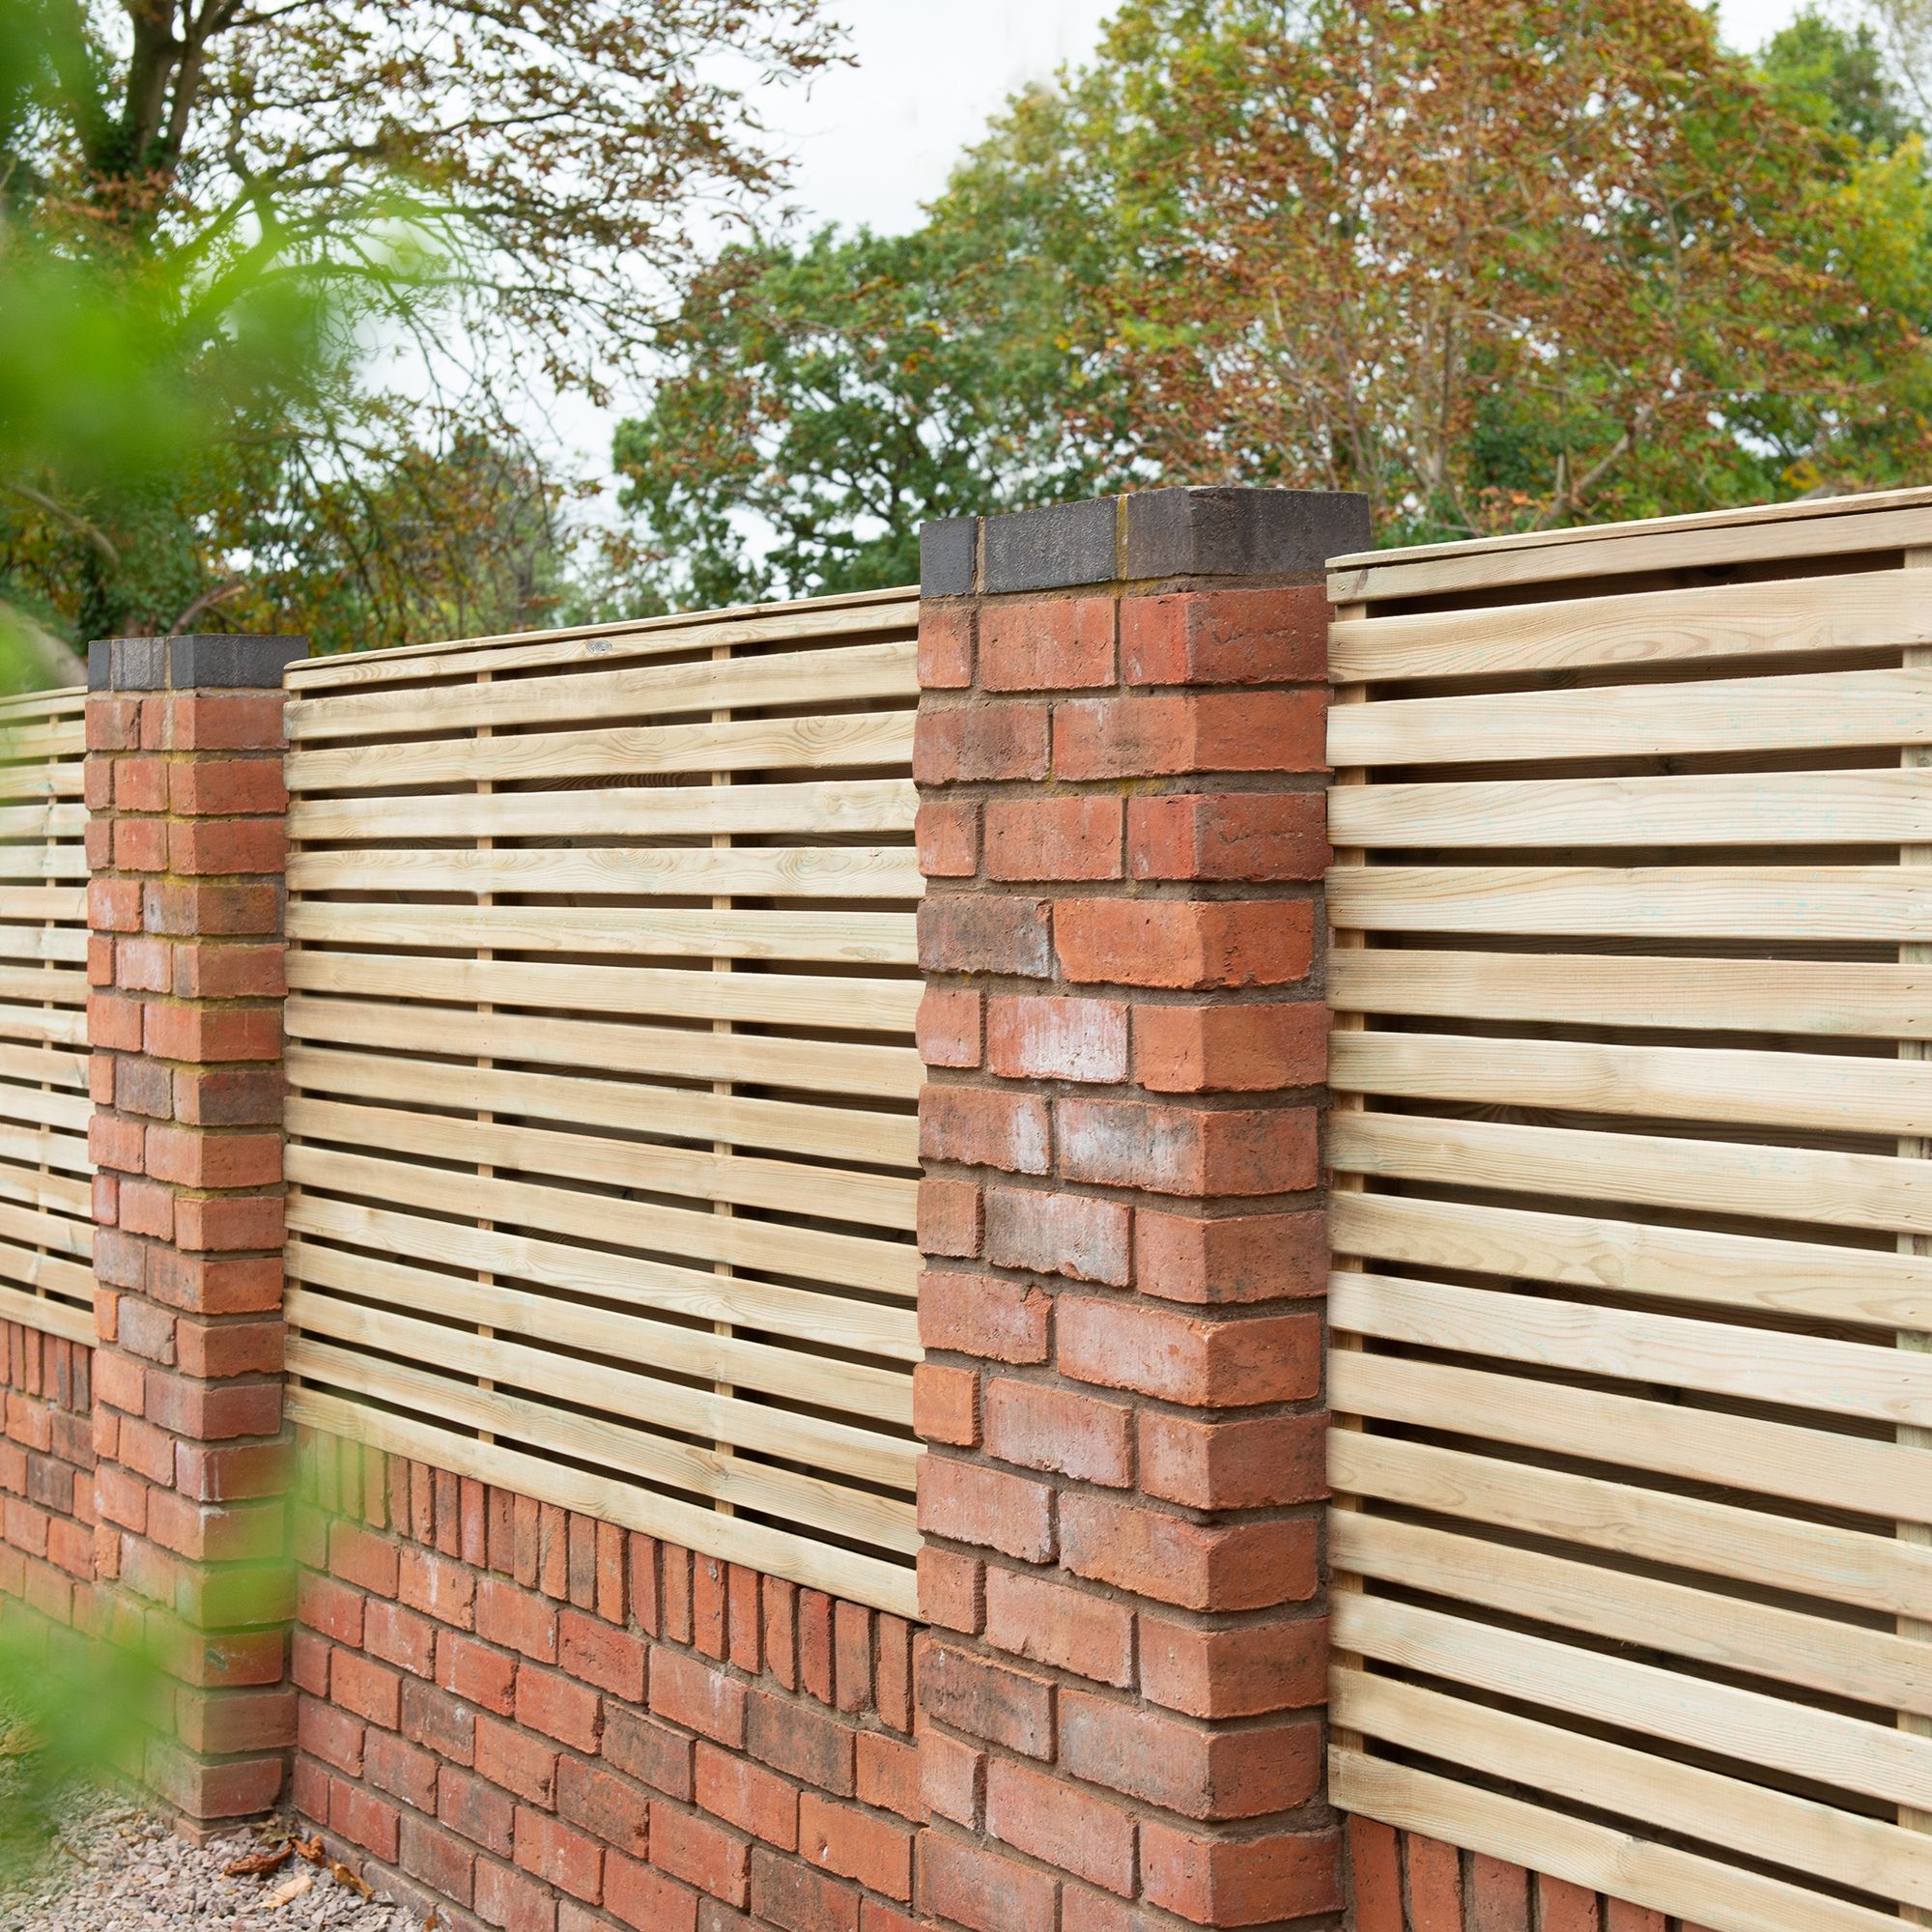 Forest Garden Contemporary Slatted Pressure treated 4ft Wooden Decorative fence panel (W)1.8m (H)1.2m, Pack of 5